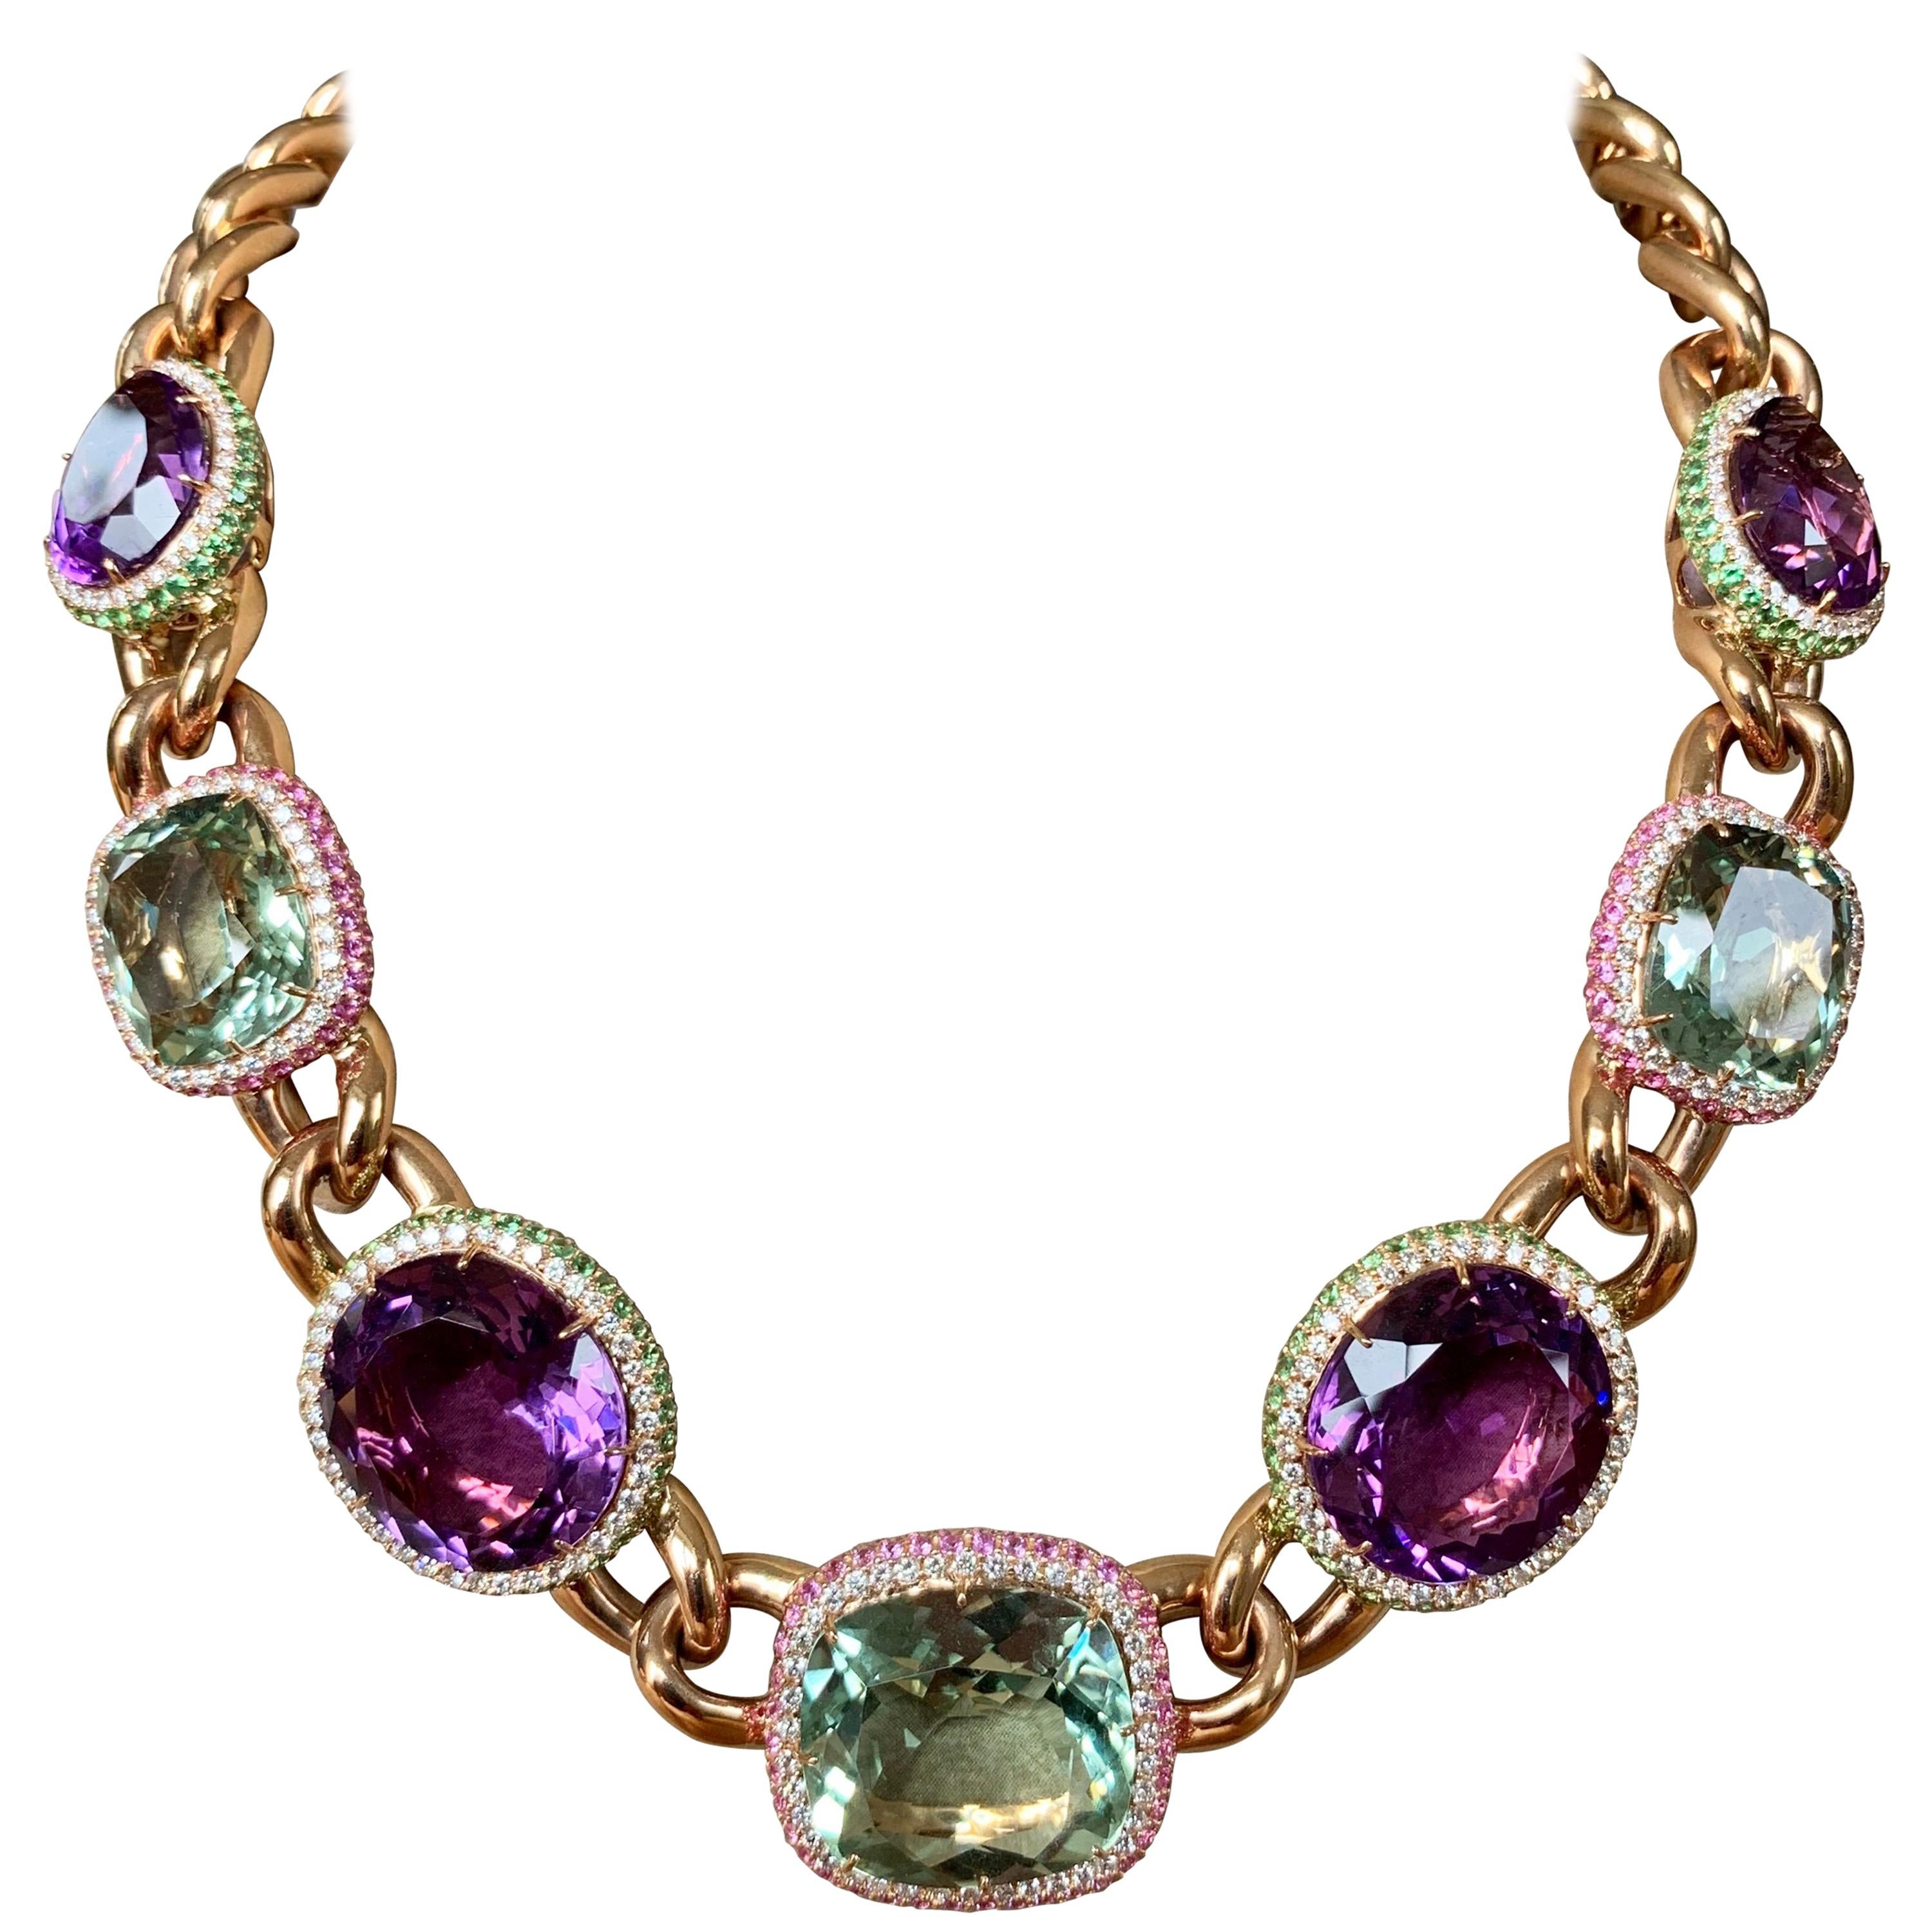 Stylish Big Bold Statement Necklace with Various Colored Stones For Sale